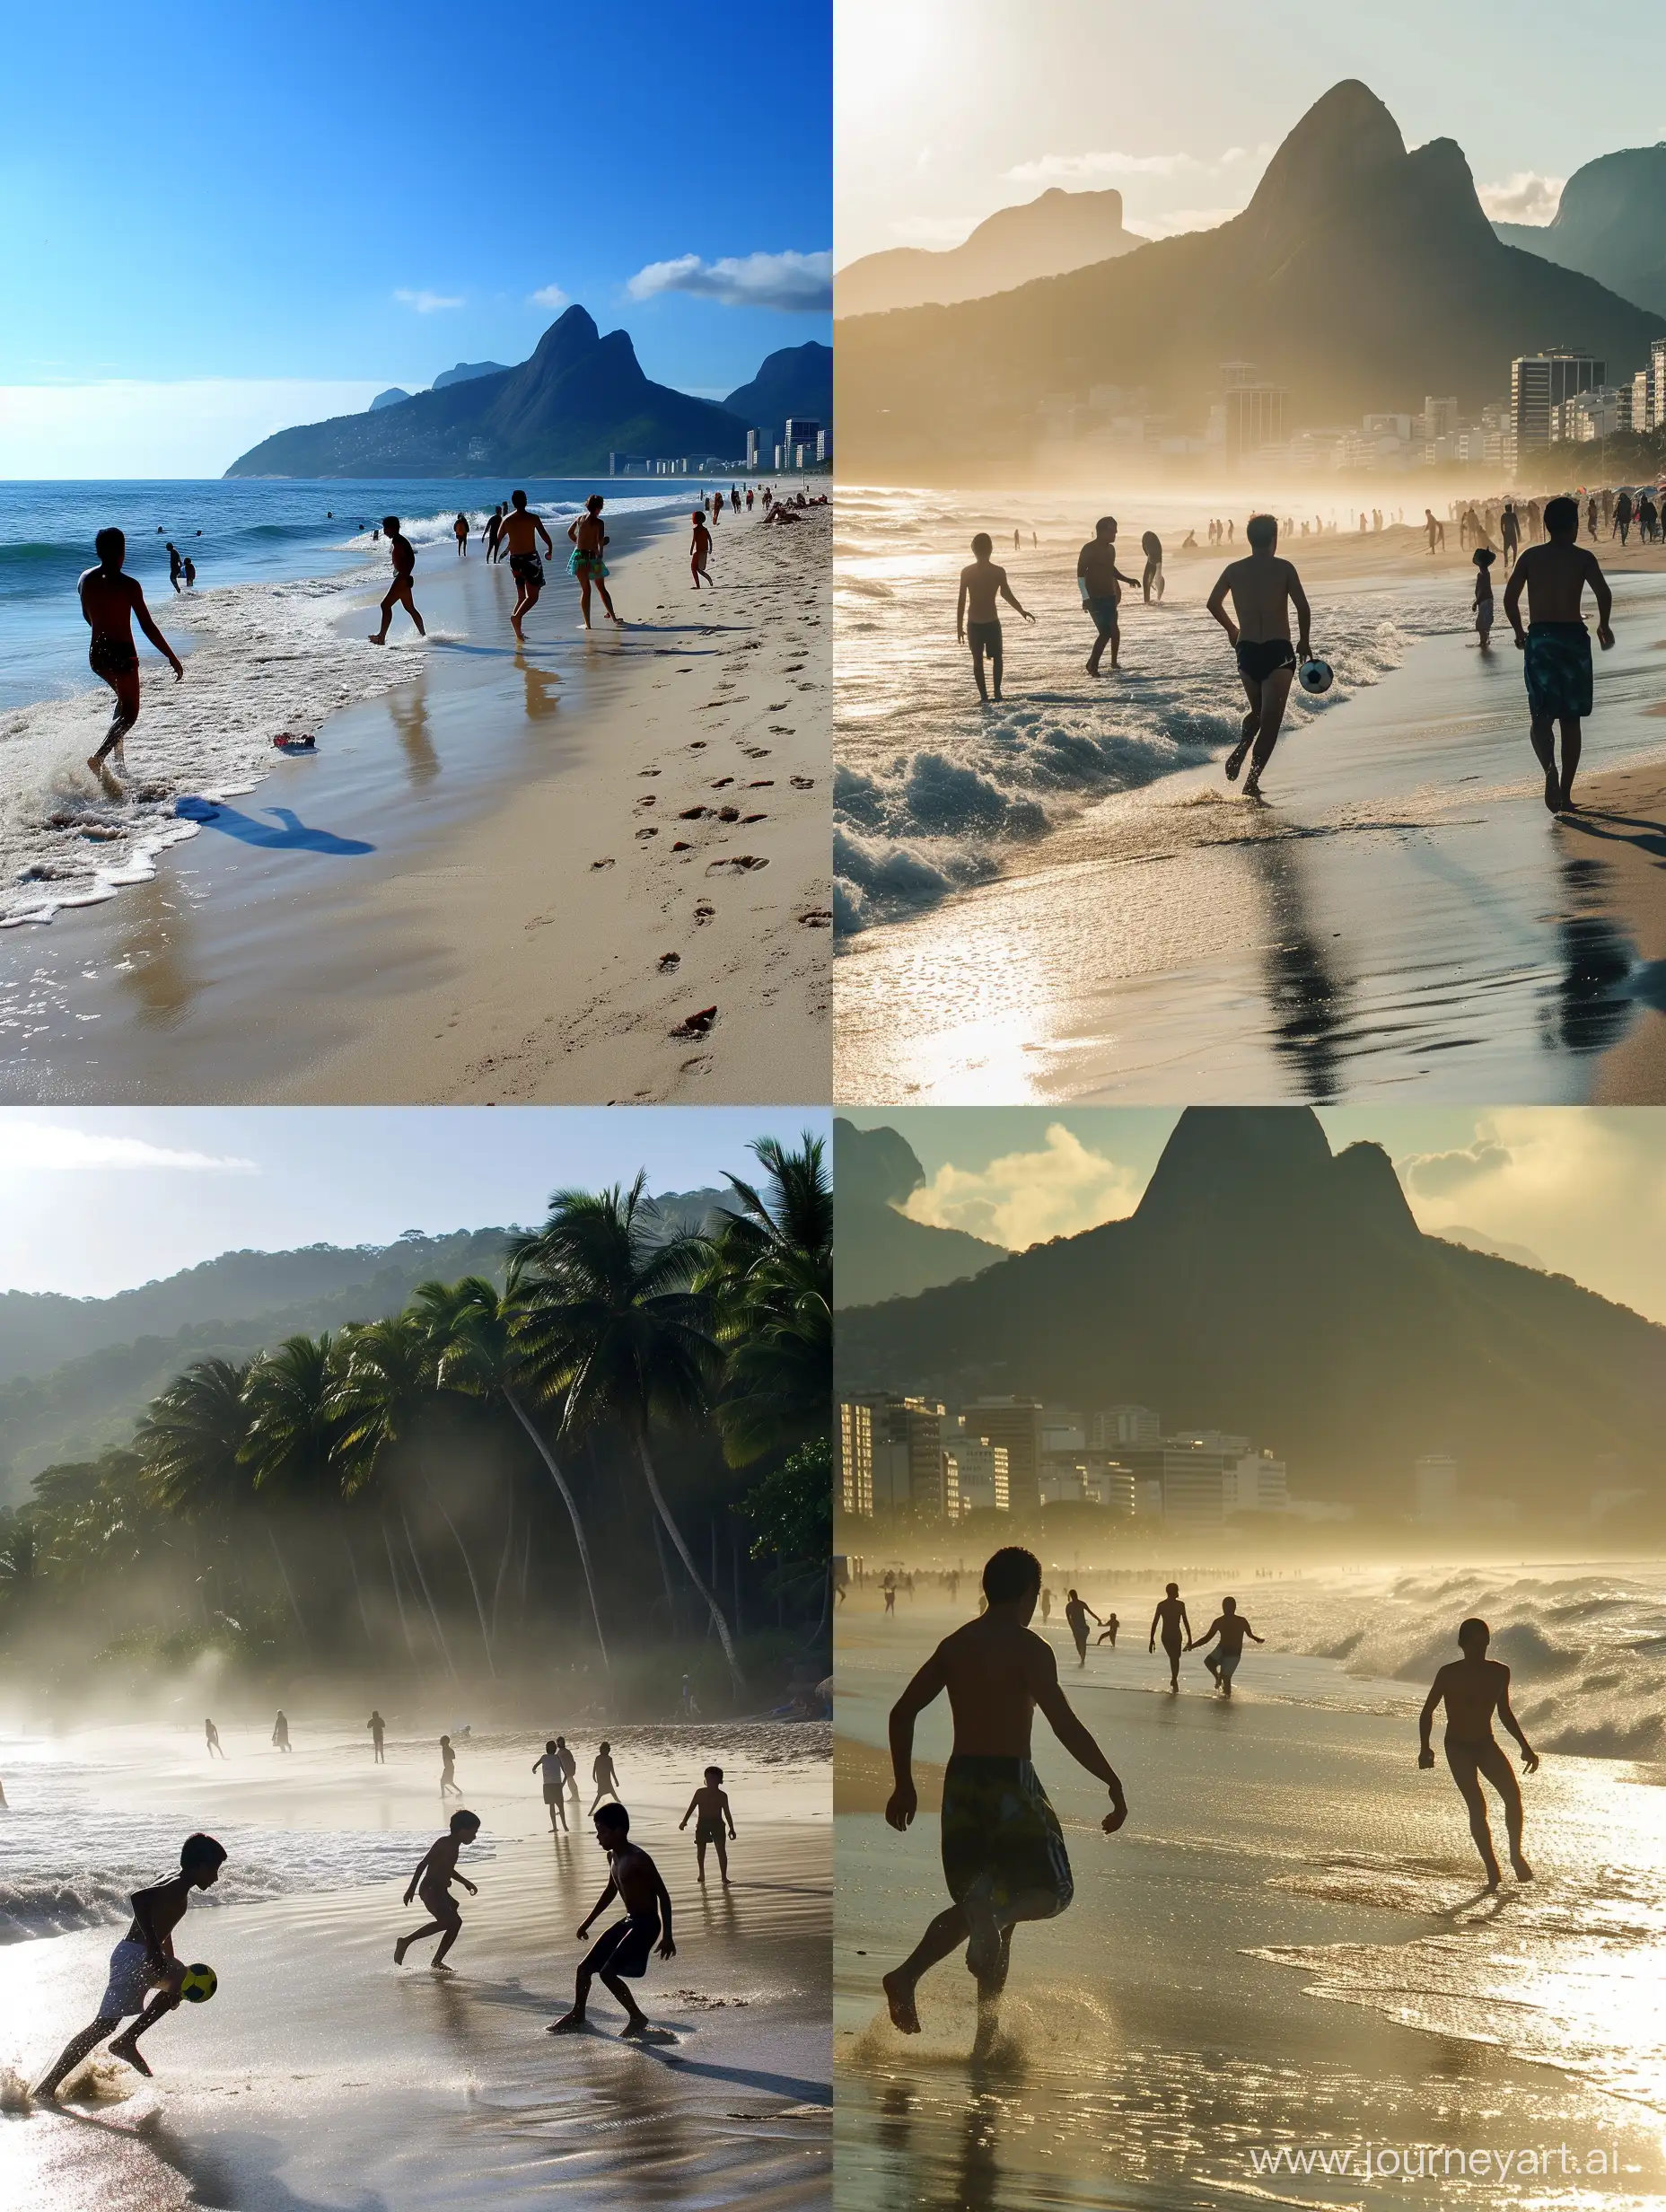 Playing football  on the beach in south america